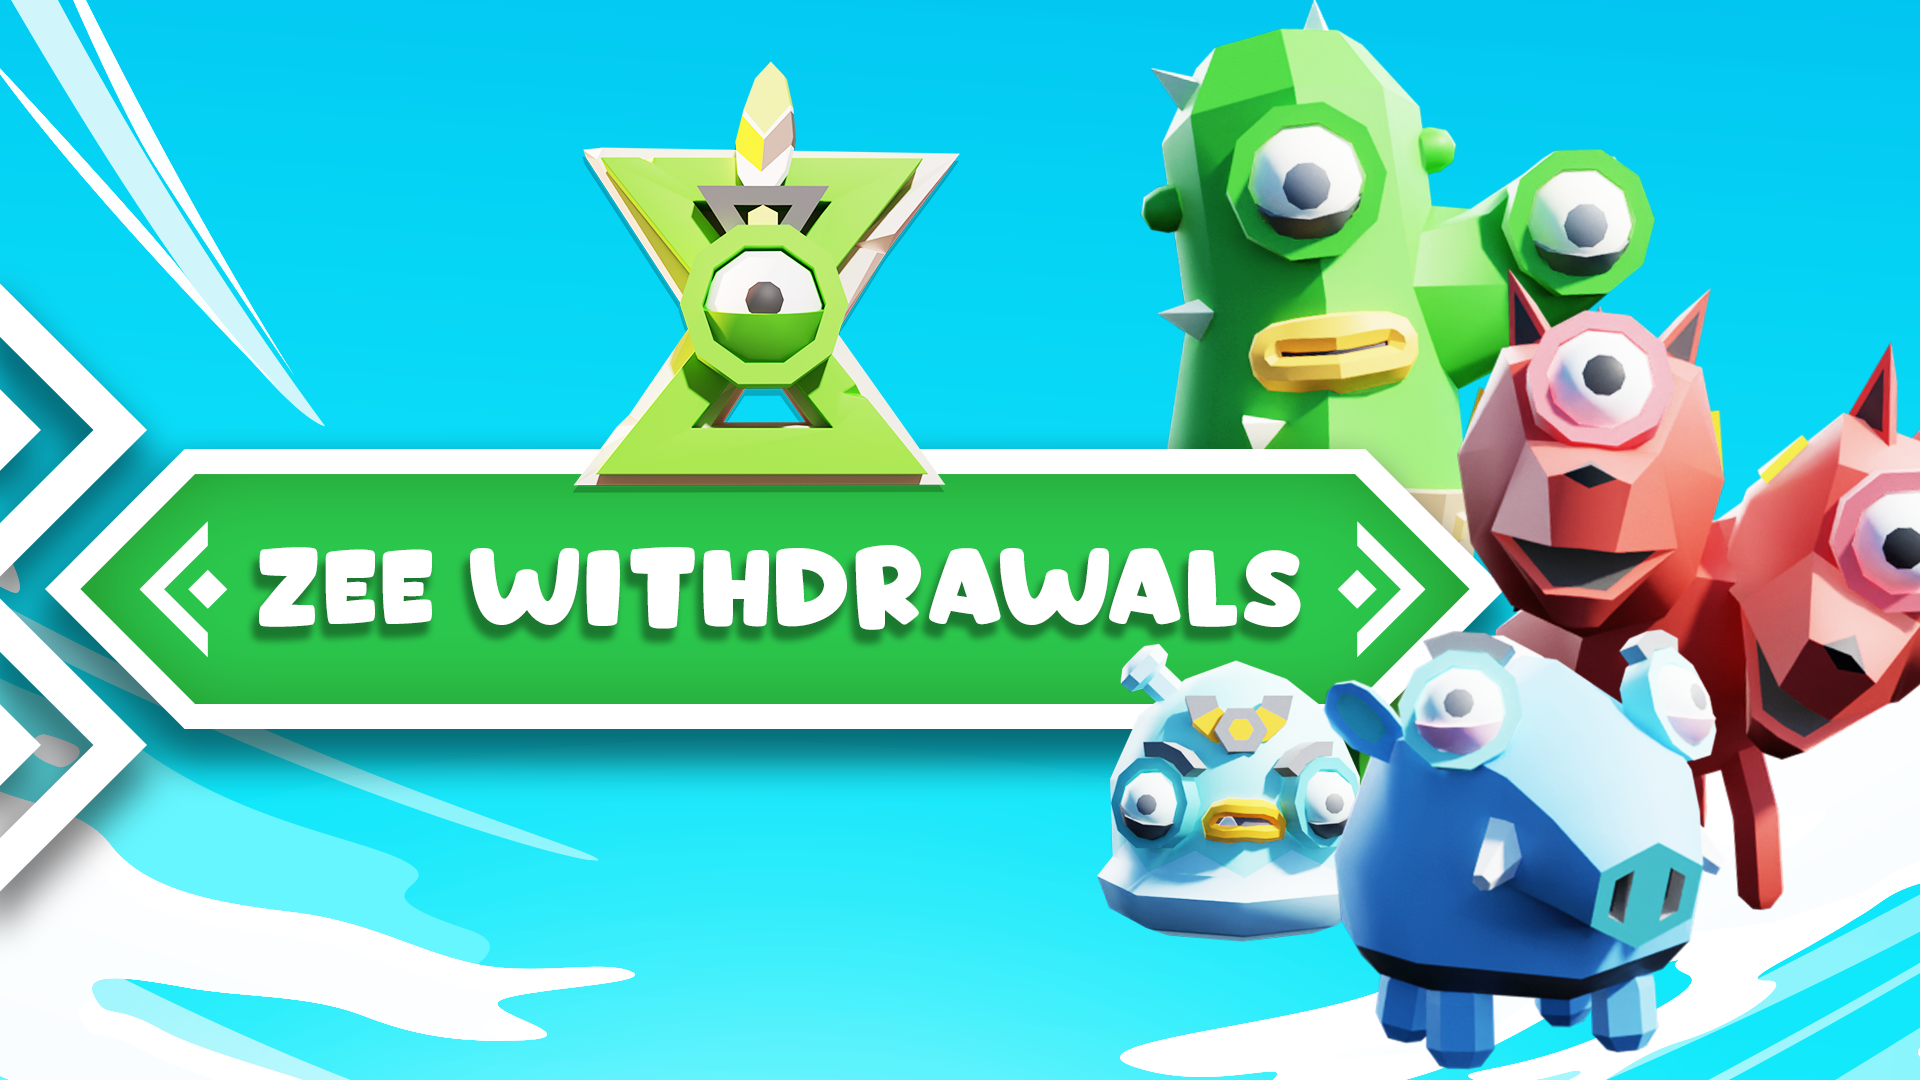 Zee withdrawals are LIVE!